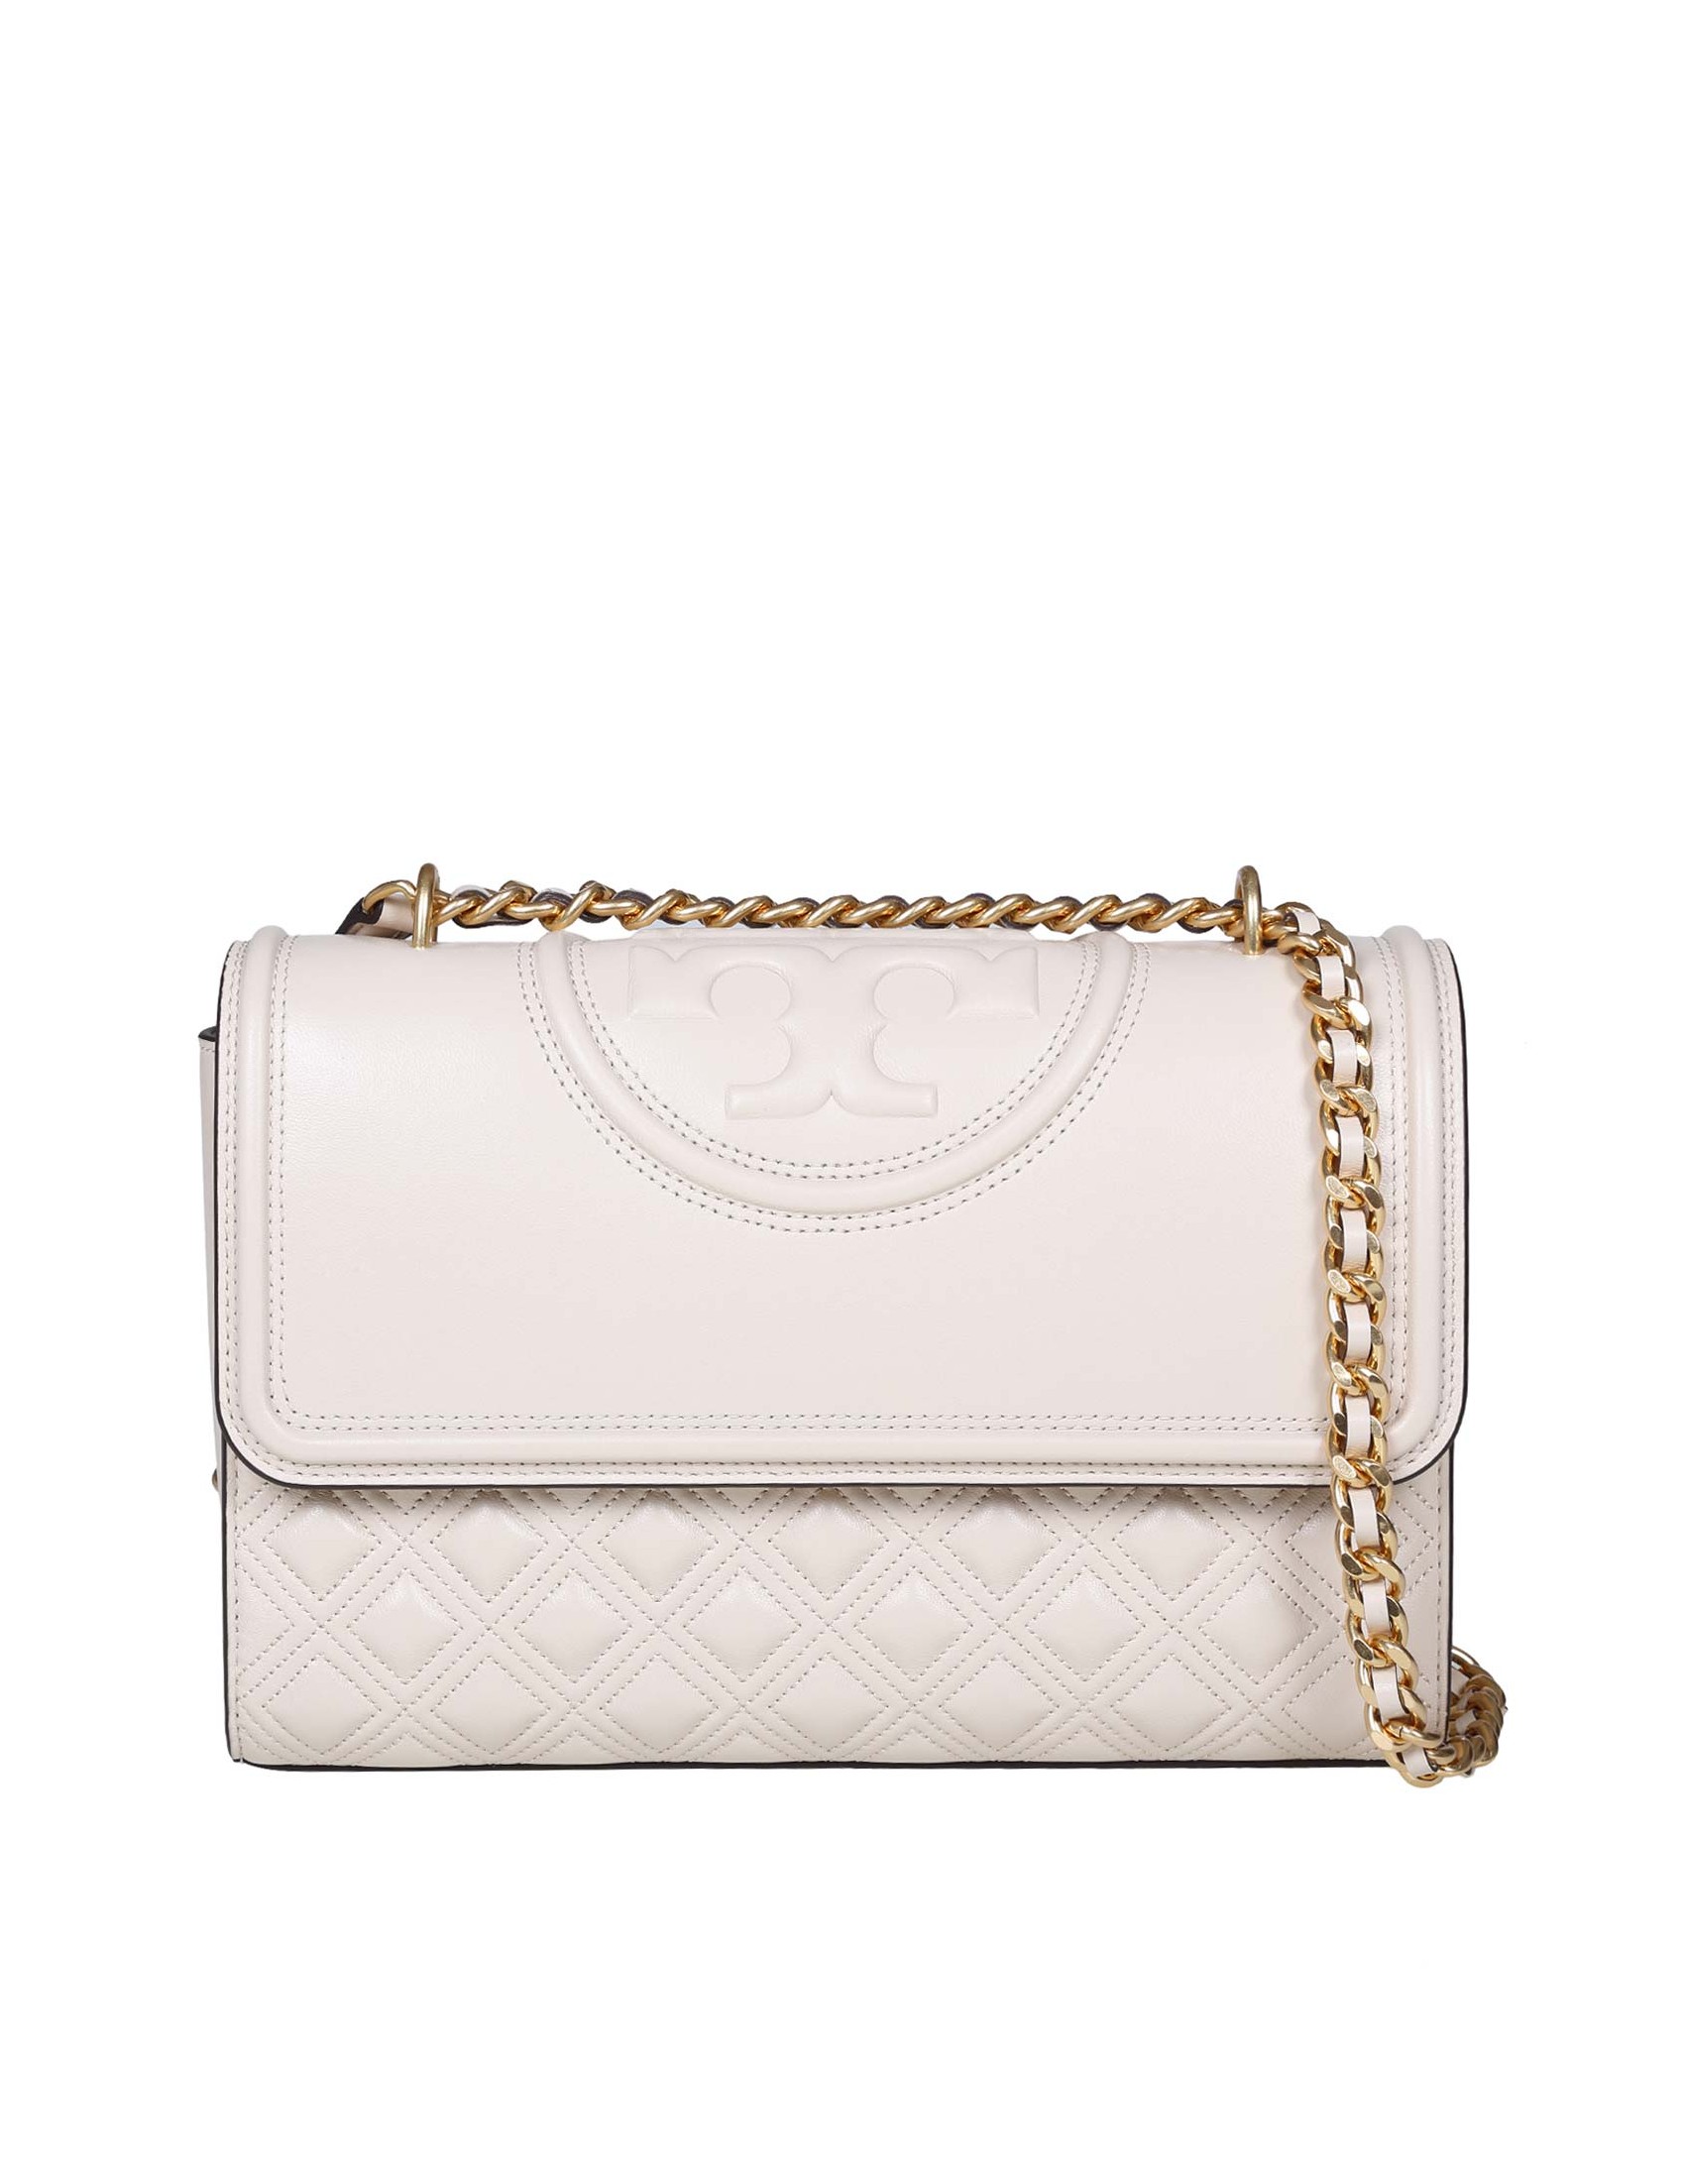 TORY BURCH FLEMING SHOULDER STRAP IN CREAM LEATHER